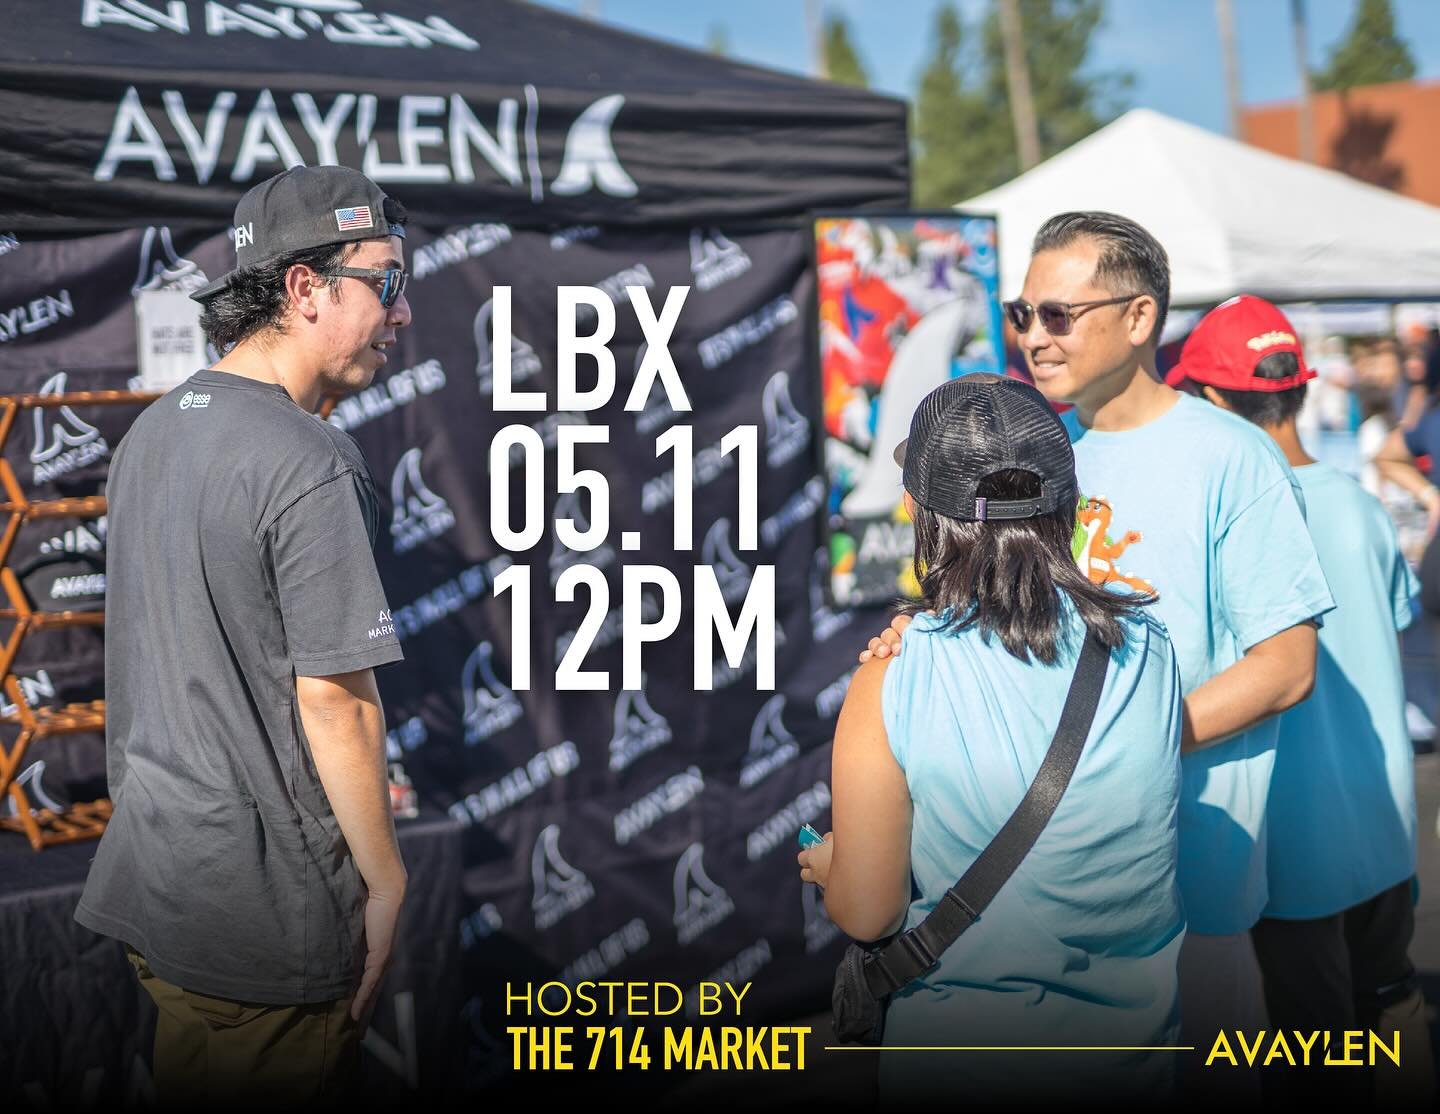 Avaylen will be the @longbeachexchange this Saturday, May 11th!⚡️ Still figuring out our game plan but swing by nonetheless! 
.
.
.
#avaylen #teamavaylen #avaylendesigns #avaylenusa #anthonyavaylen #longbeach #lbx #longbeachexchange #lbc #oc #souther